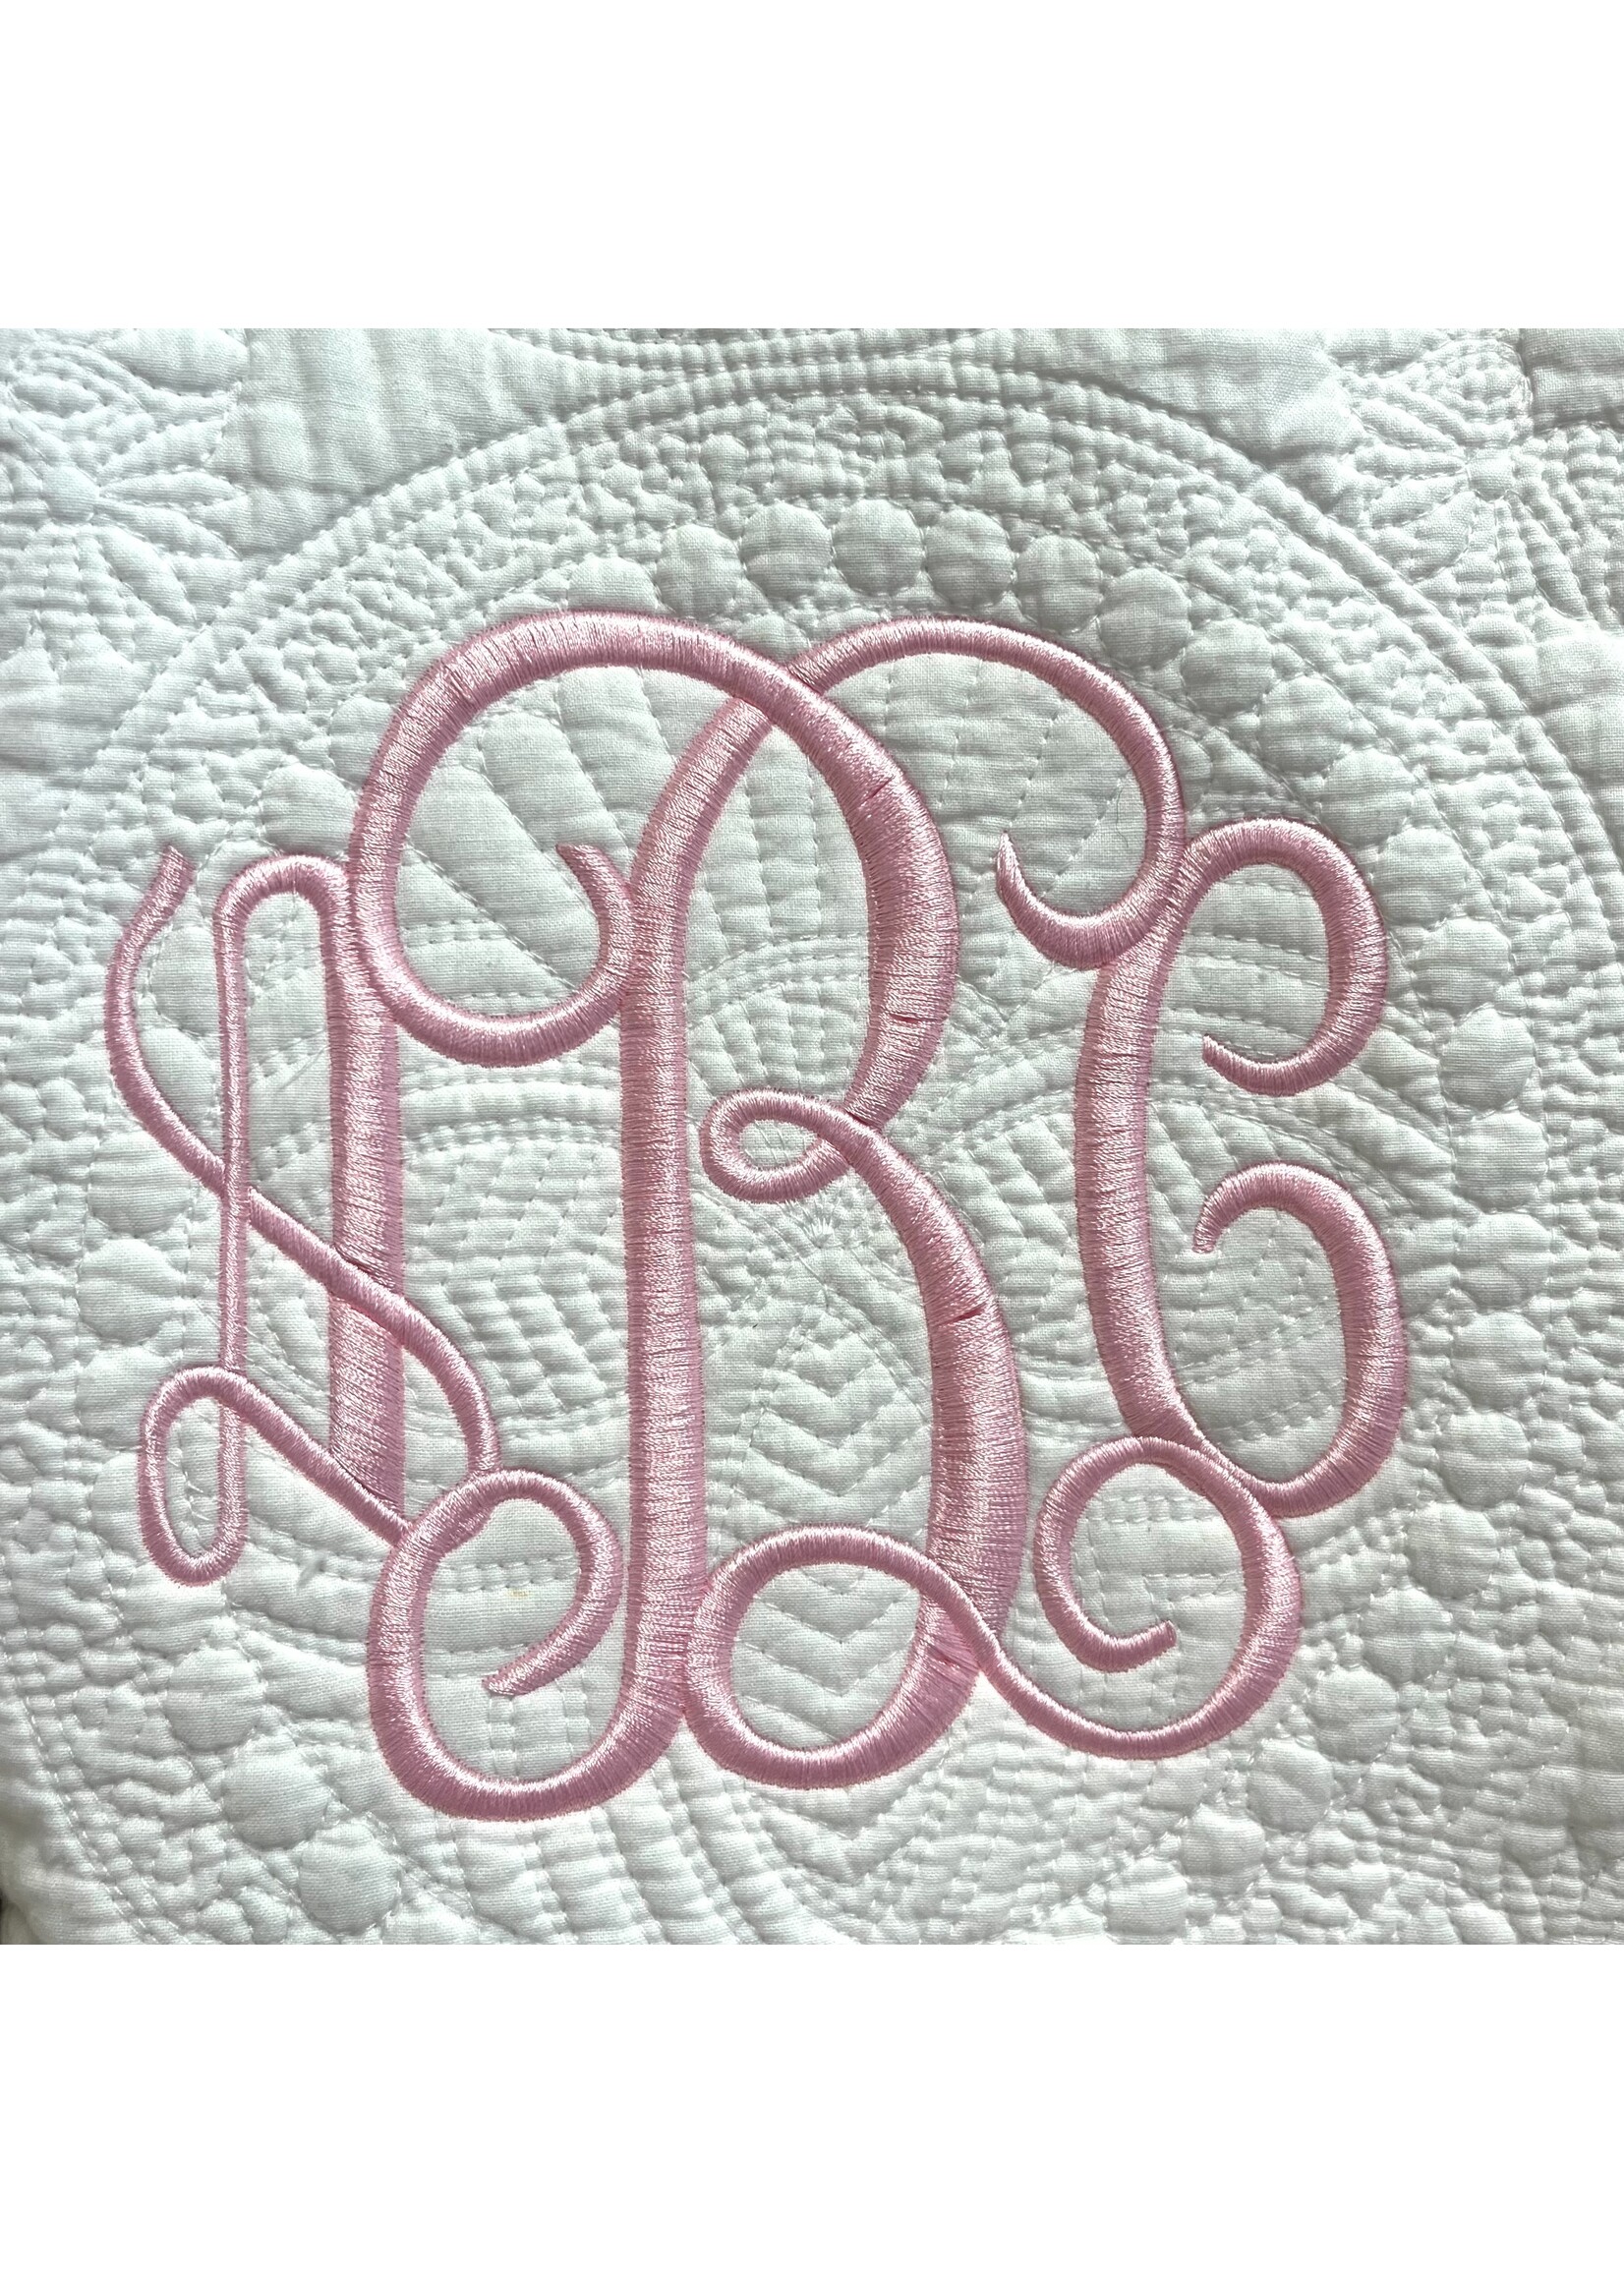 Oriental Products Signature Baby Quilt w/ Monogram  Tan